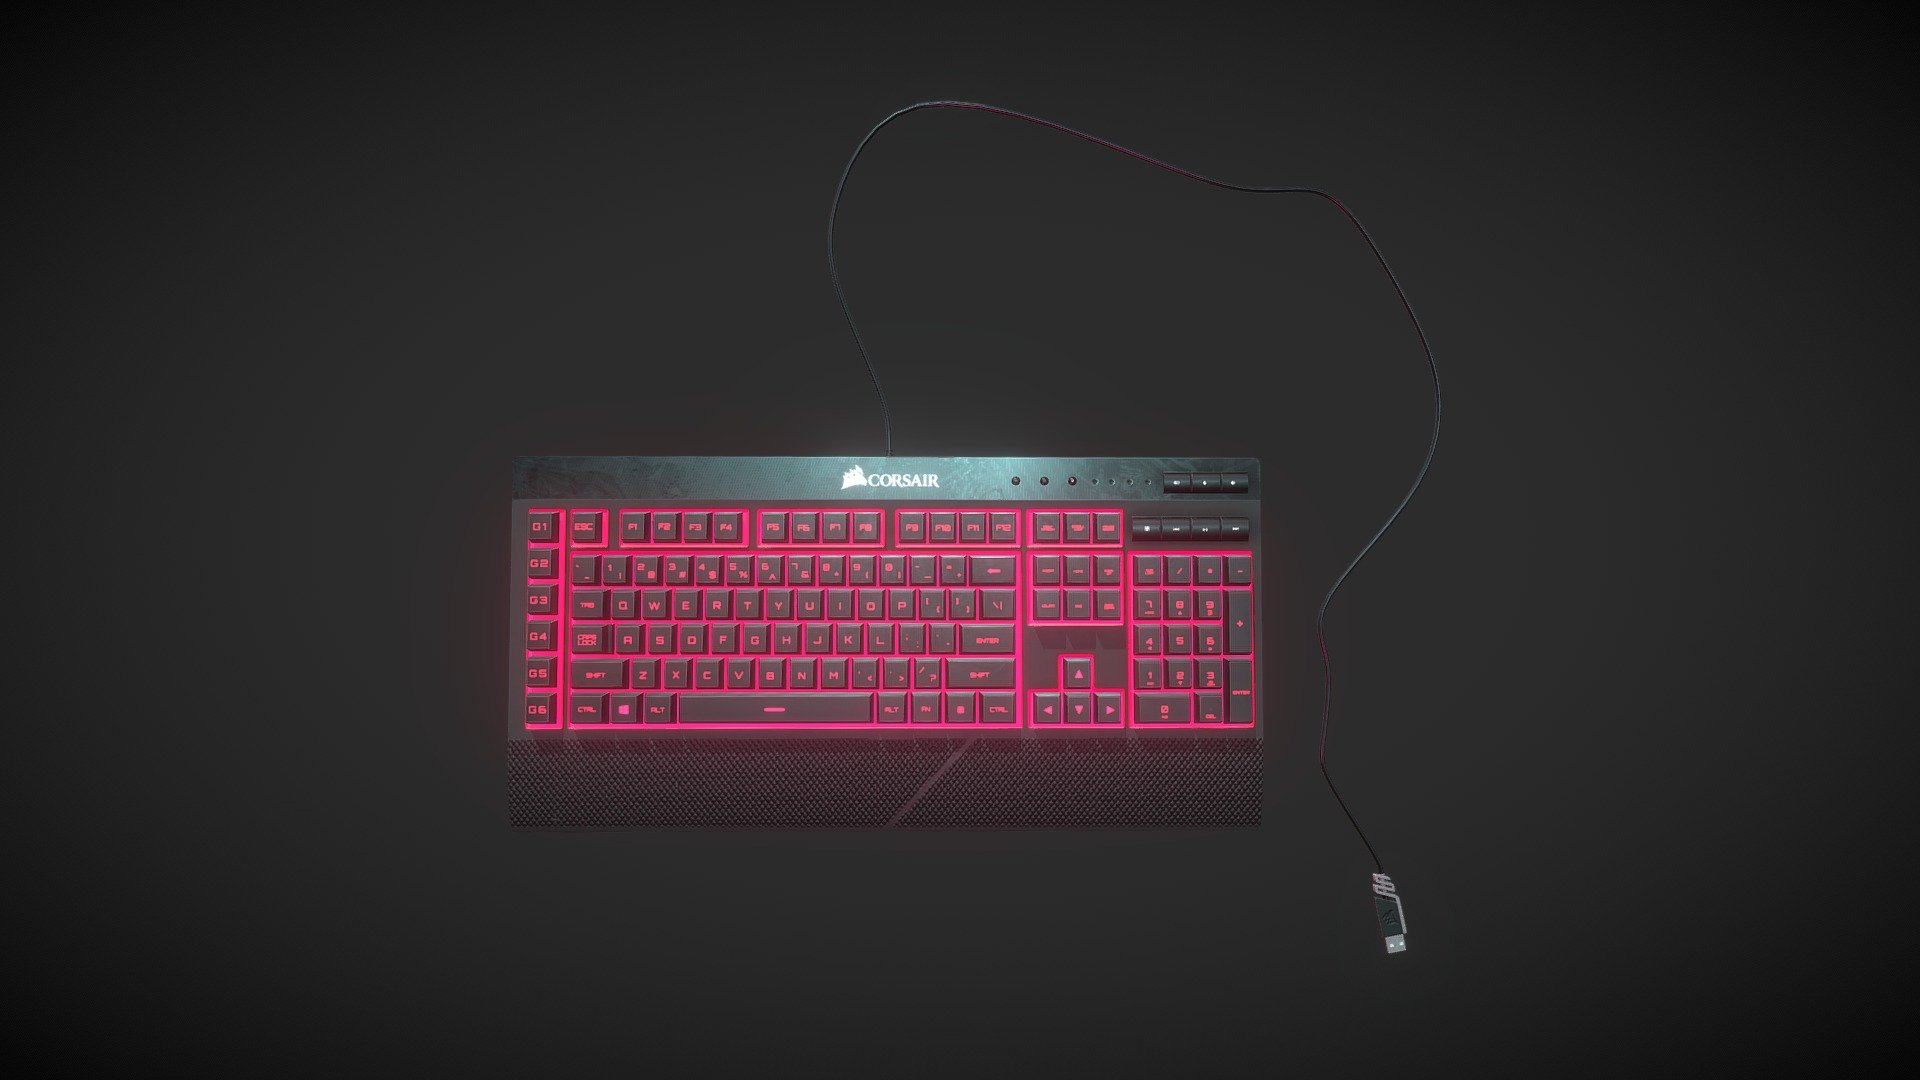 I had a really fun time making this prop. I decided to model the gaming keyboard I use daily and wanted to see how it would look for a future project. The entire model was created in Maya and was later textured in Substance Painter 3d model